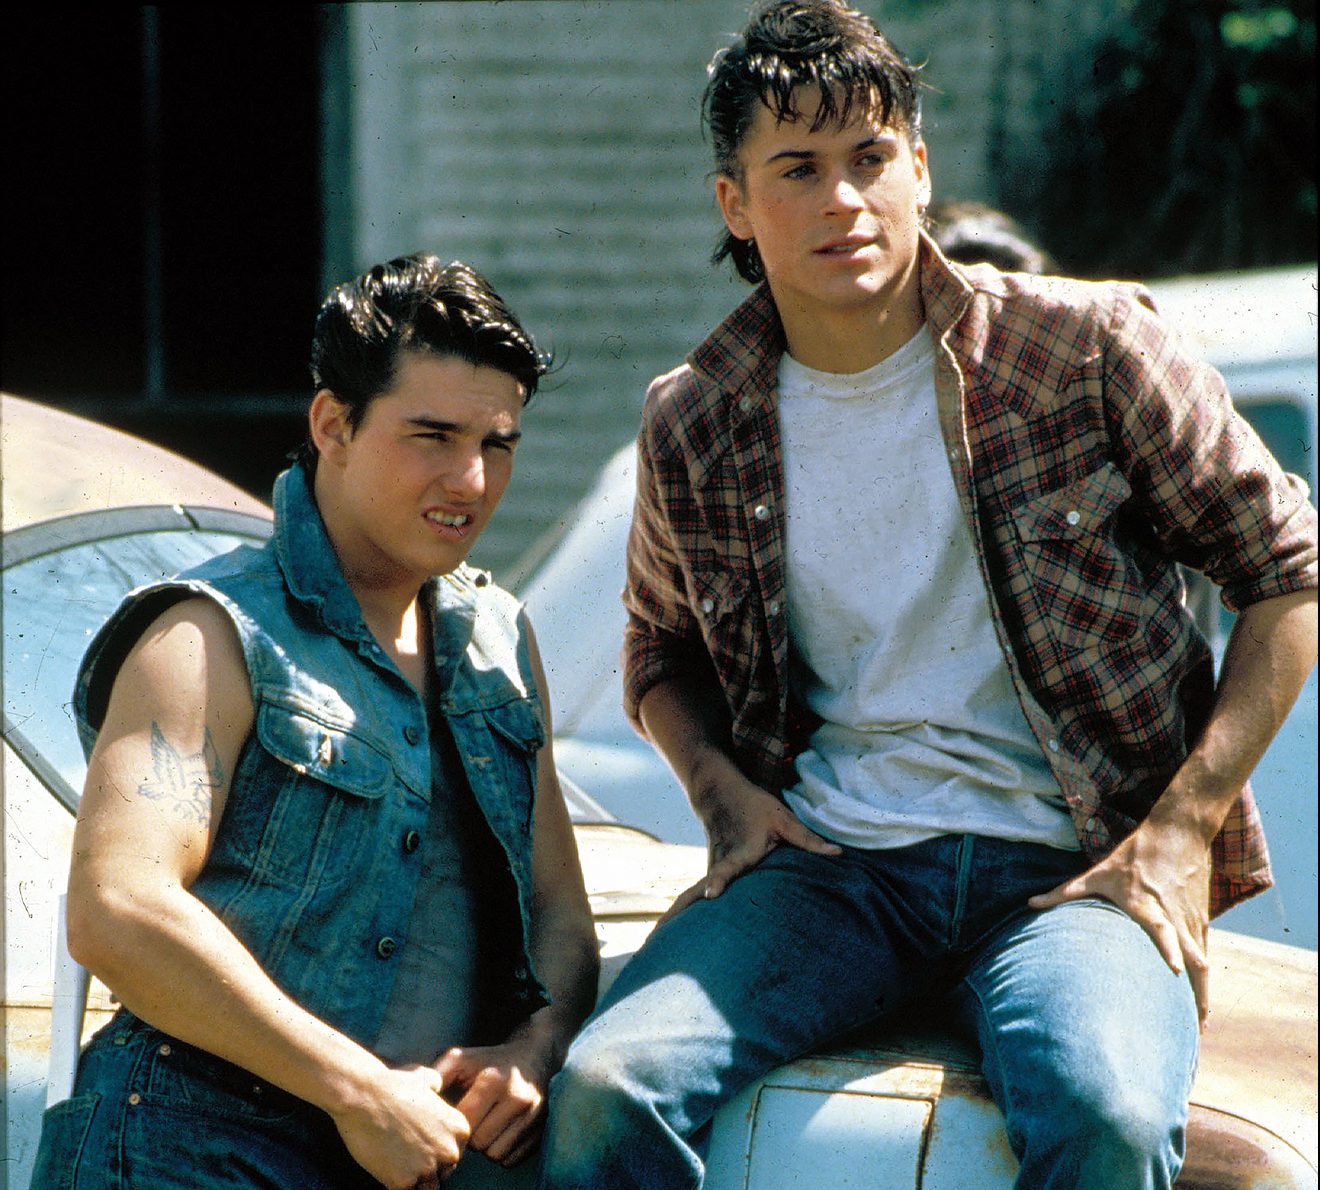 Rob Lowe reveals he was meant to play Kevin Bacon's role in Footloose